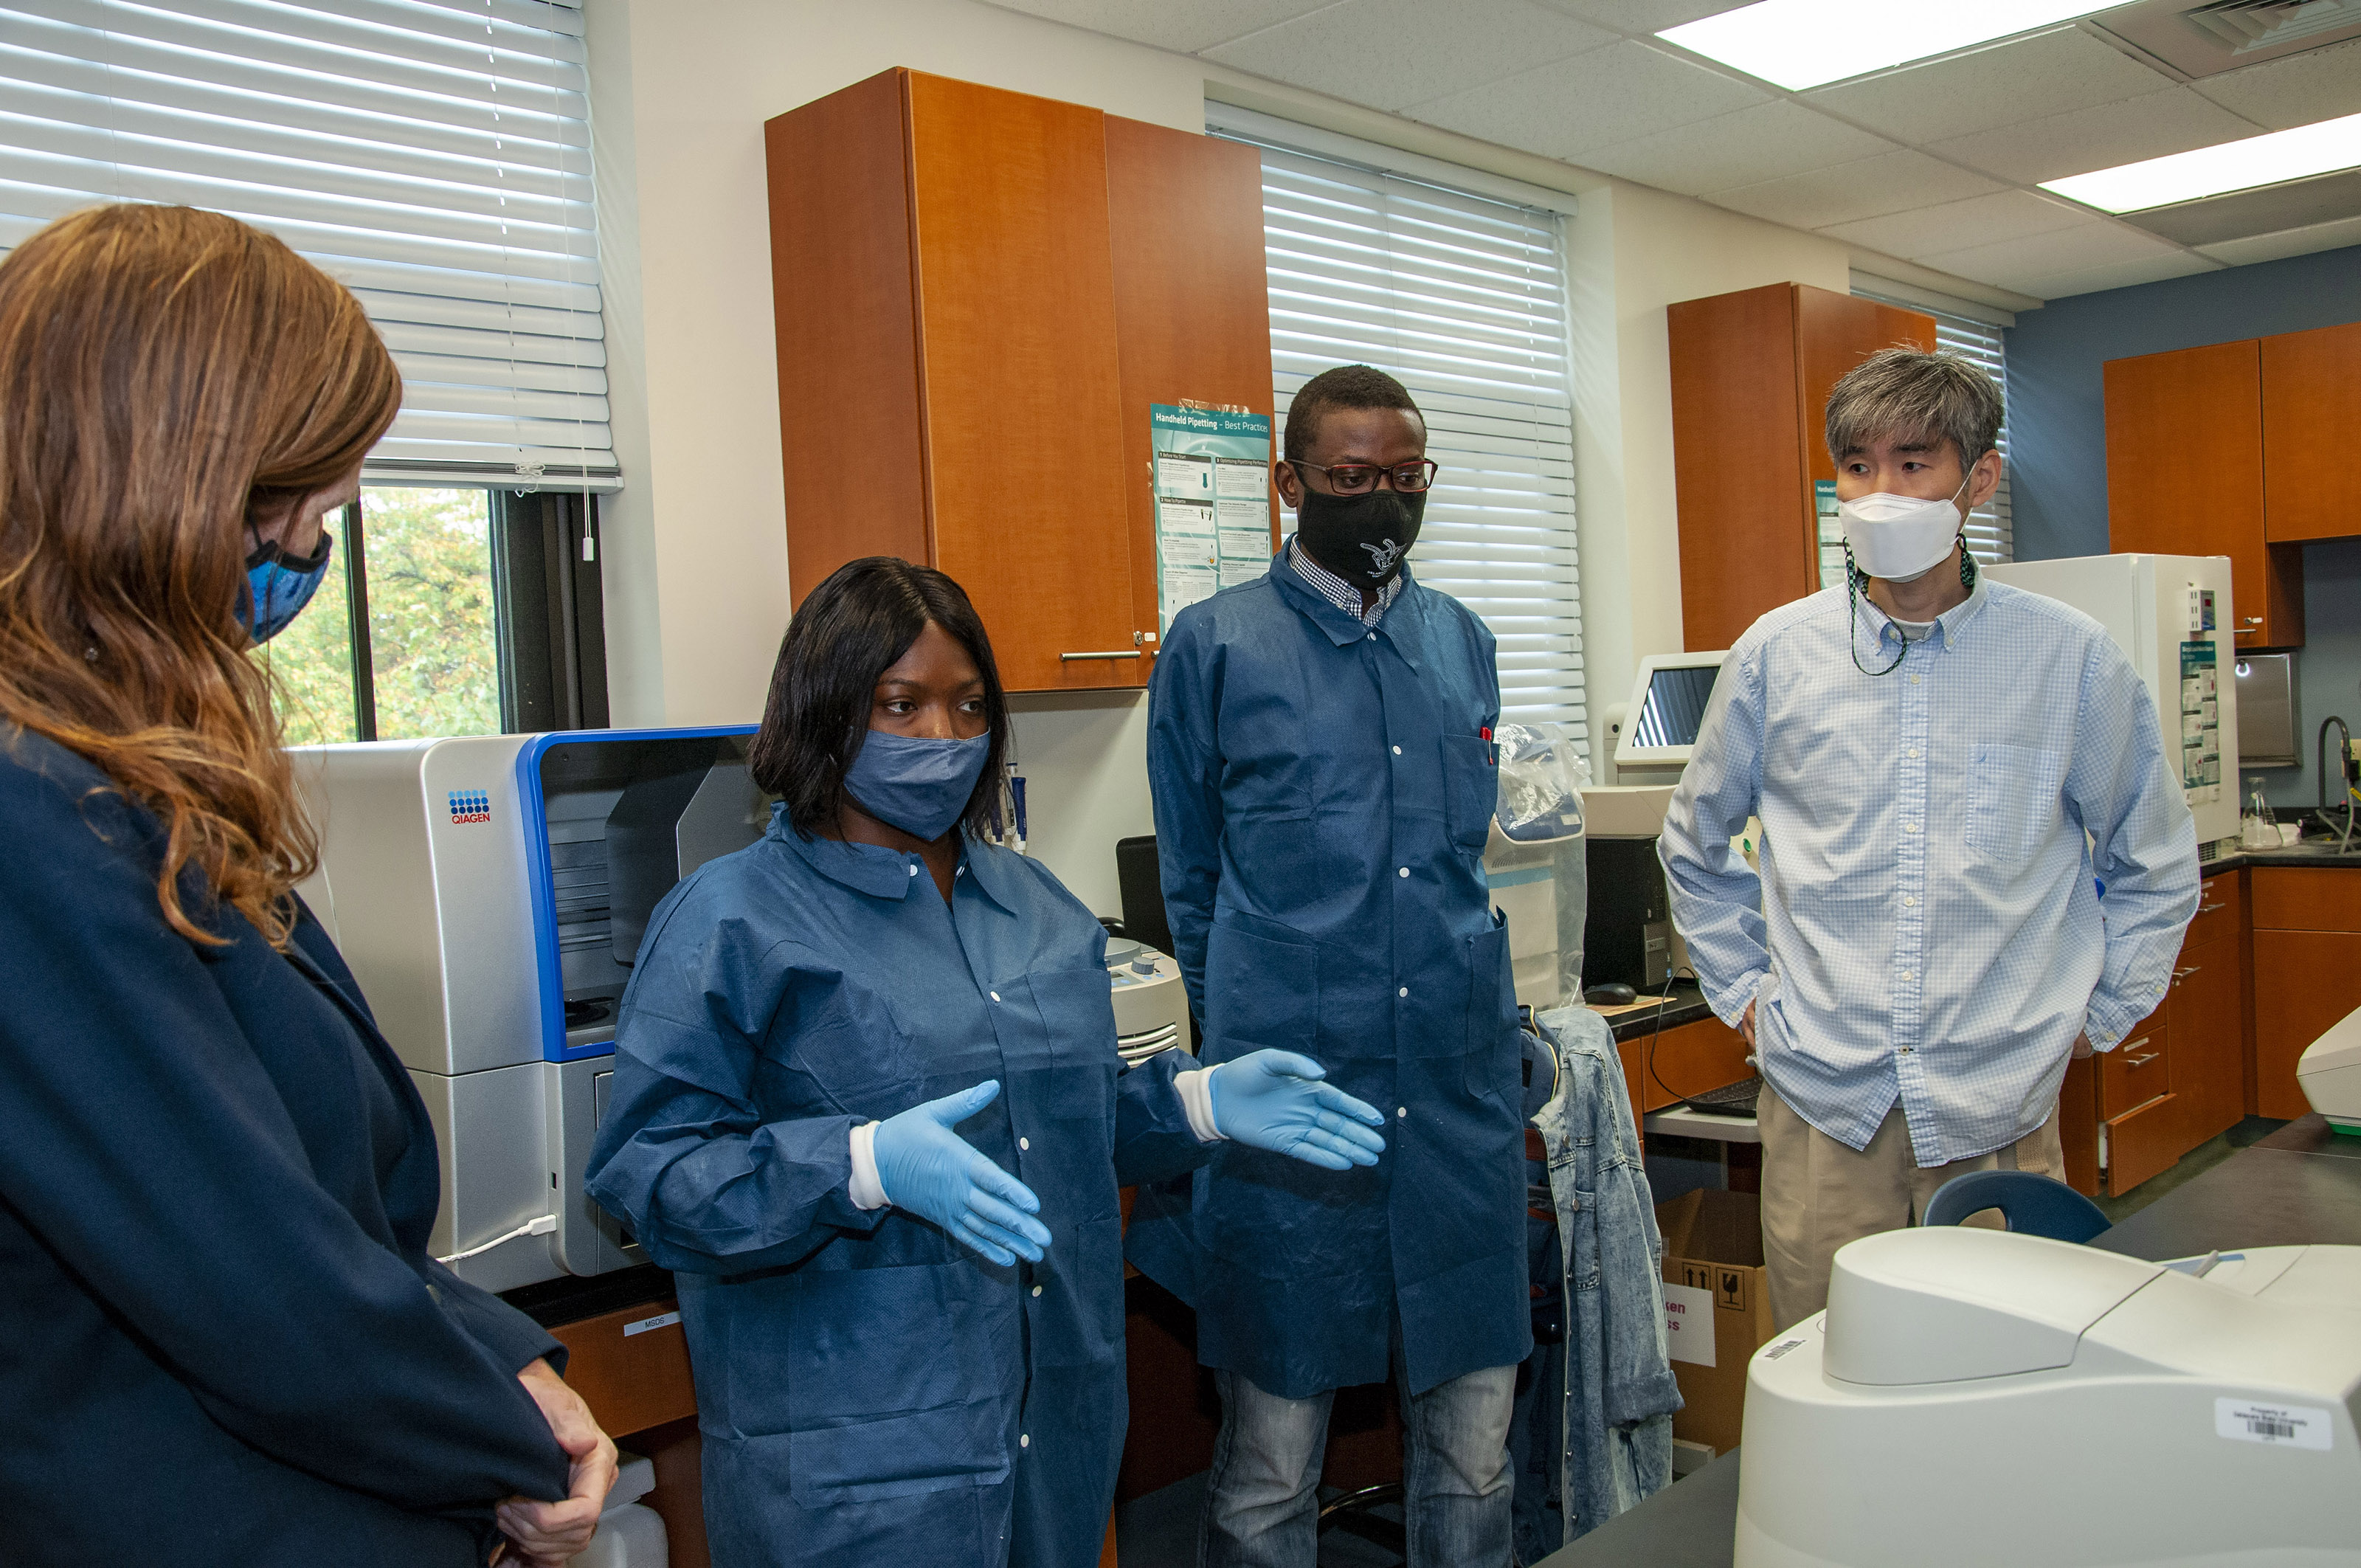 Samantha Power (far left) listens to students explain their work in the Microbiology Lab.